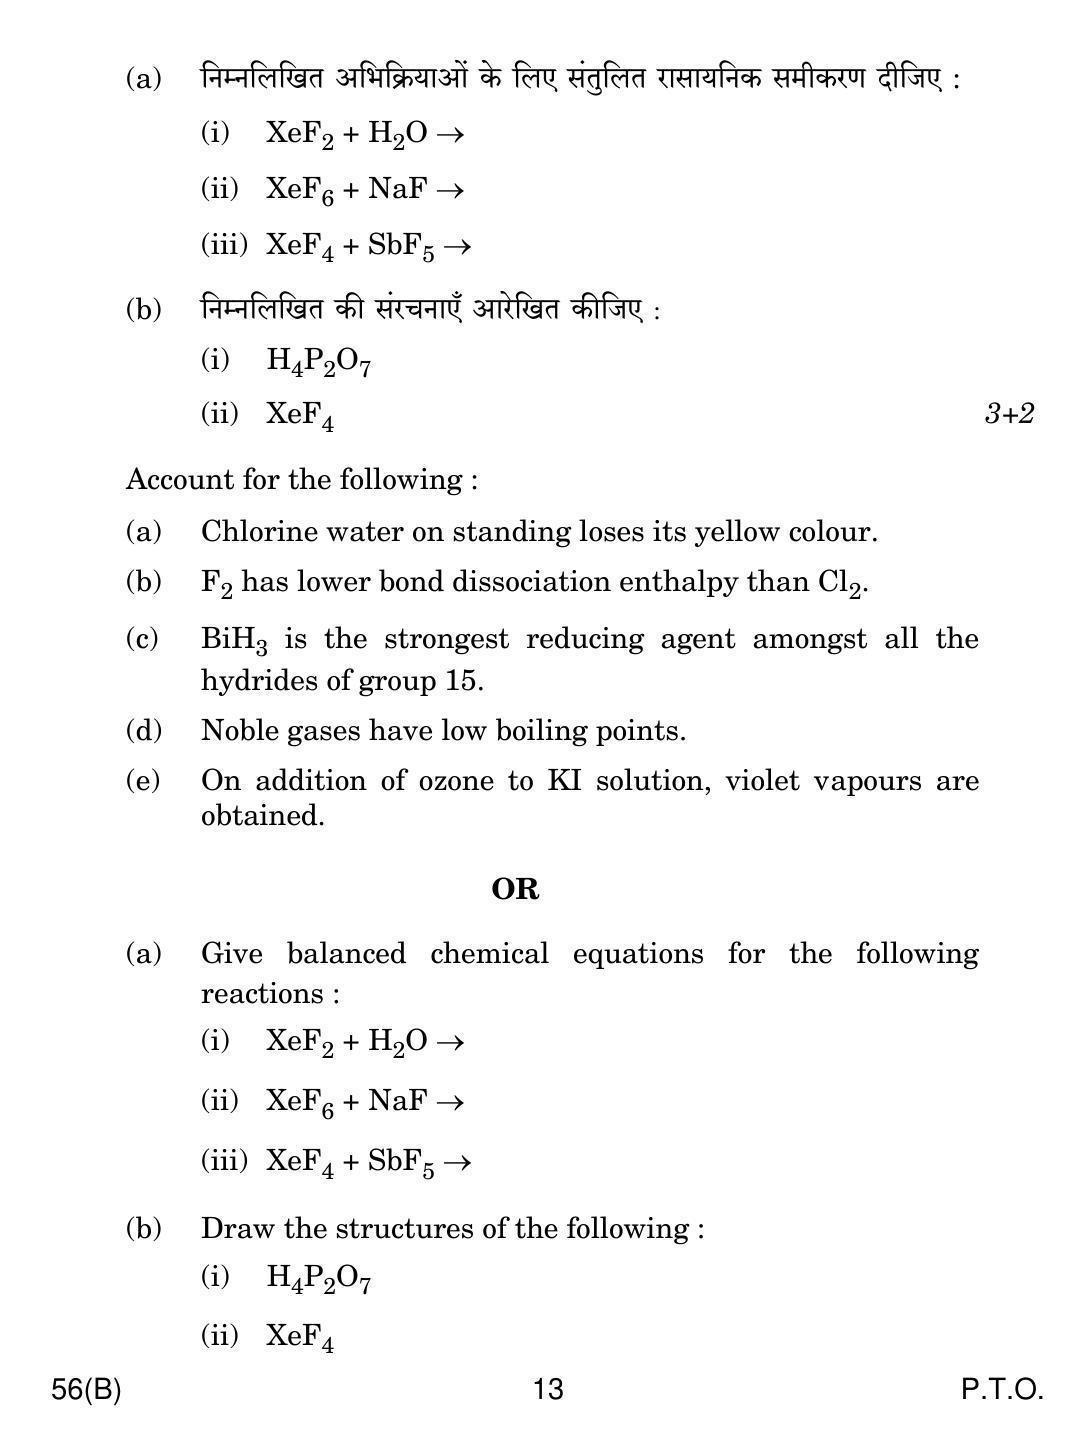 CBSE Class 12 56(B) CHEMISTRY FOR BLIND CANDIDATES 2018 Question Paper - Page 13